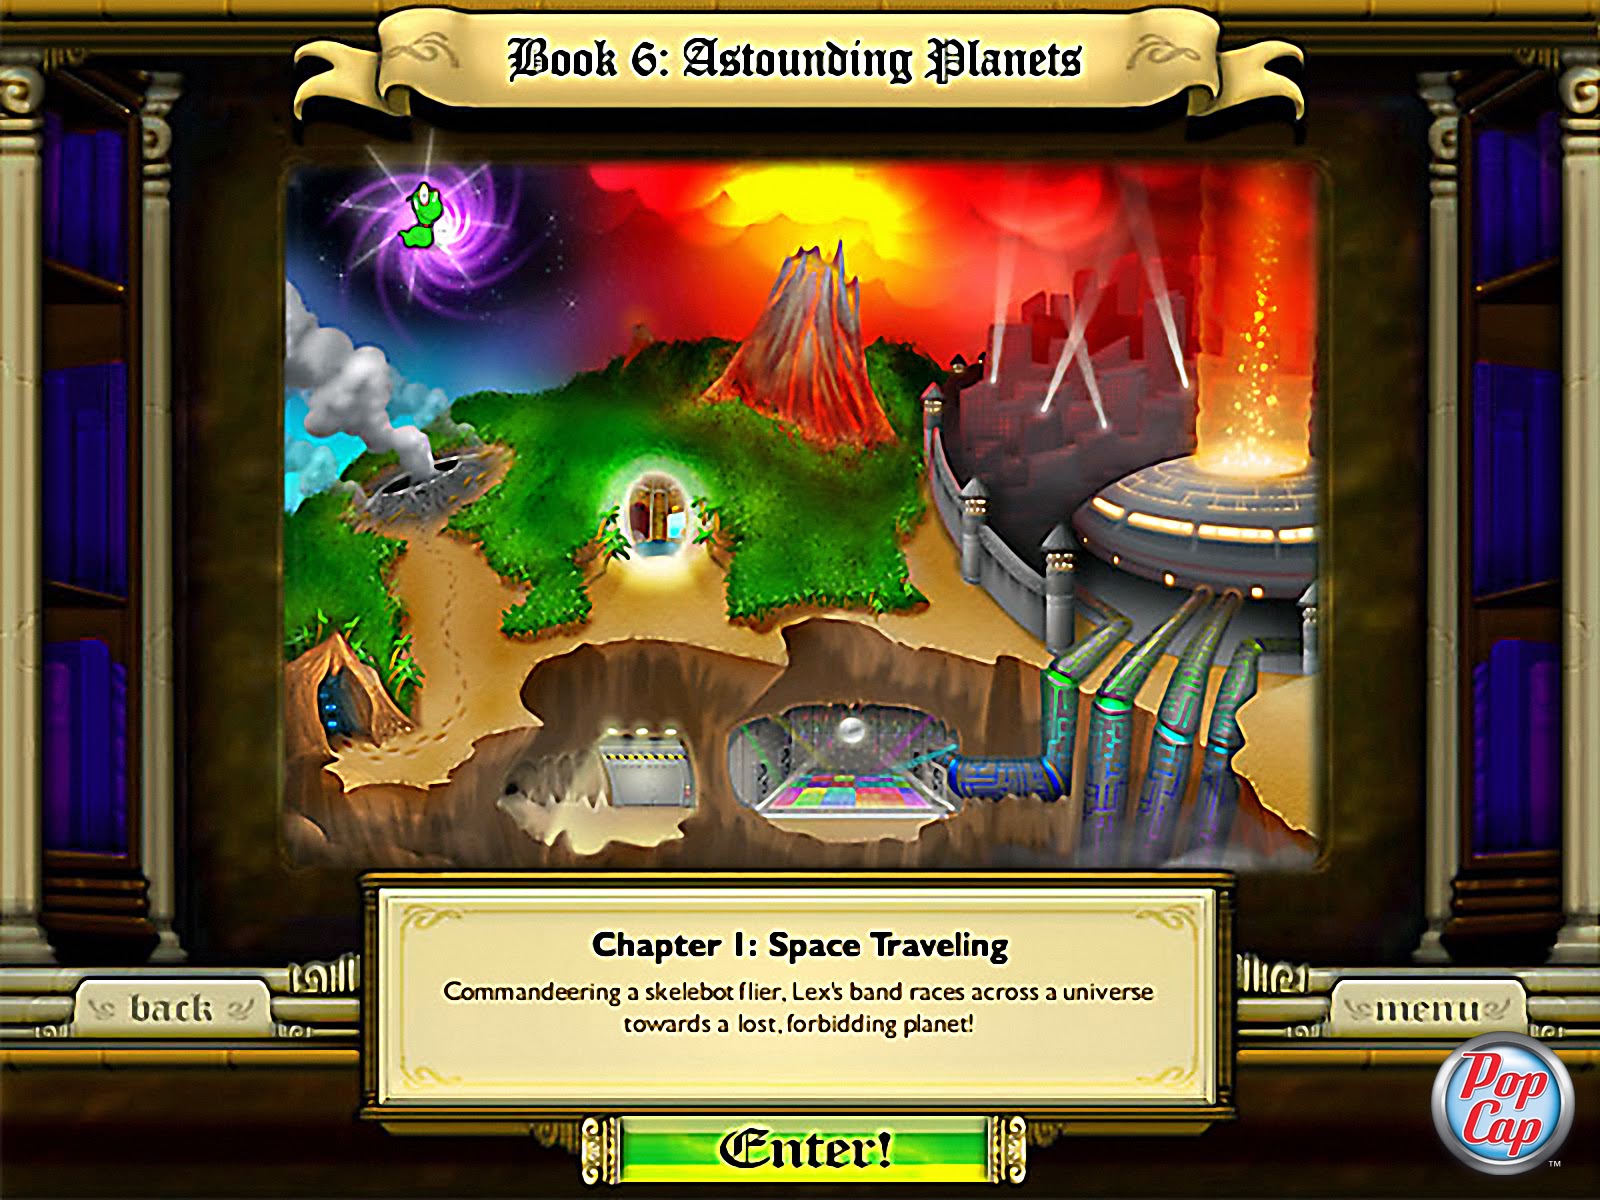 Bookworm Adventure 2 Free Download For Android